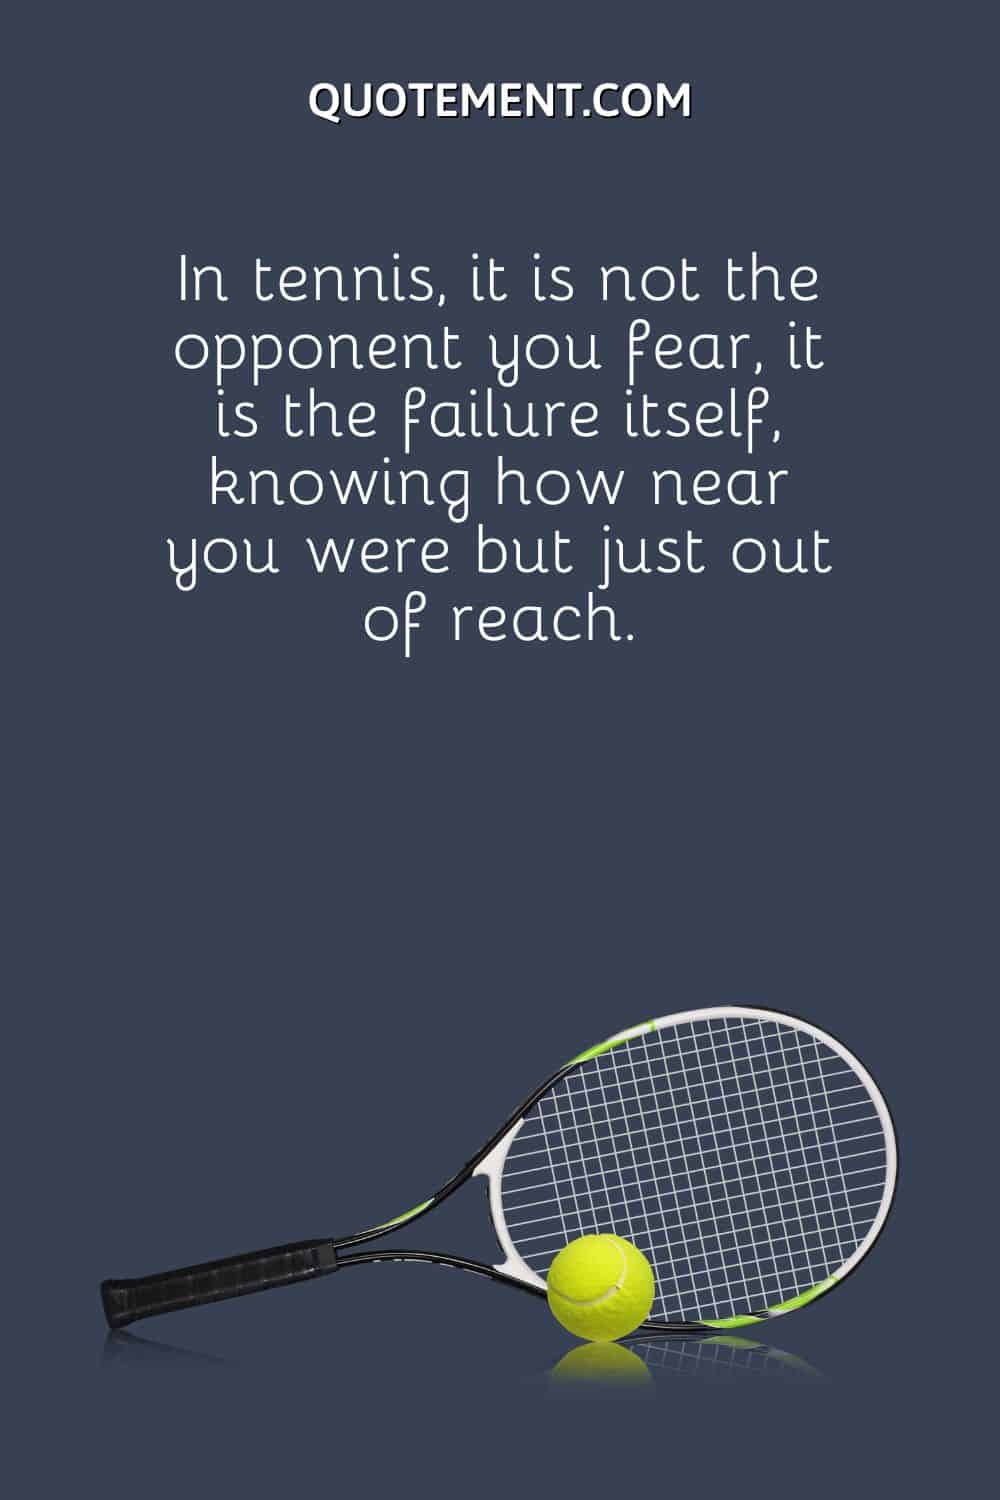 In tennis, it is not the opponent you fear, it is the failure itself, knowing how near you were but just out of reach.